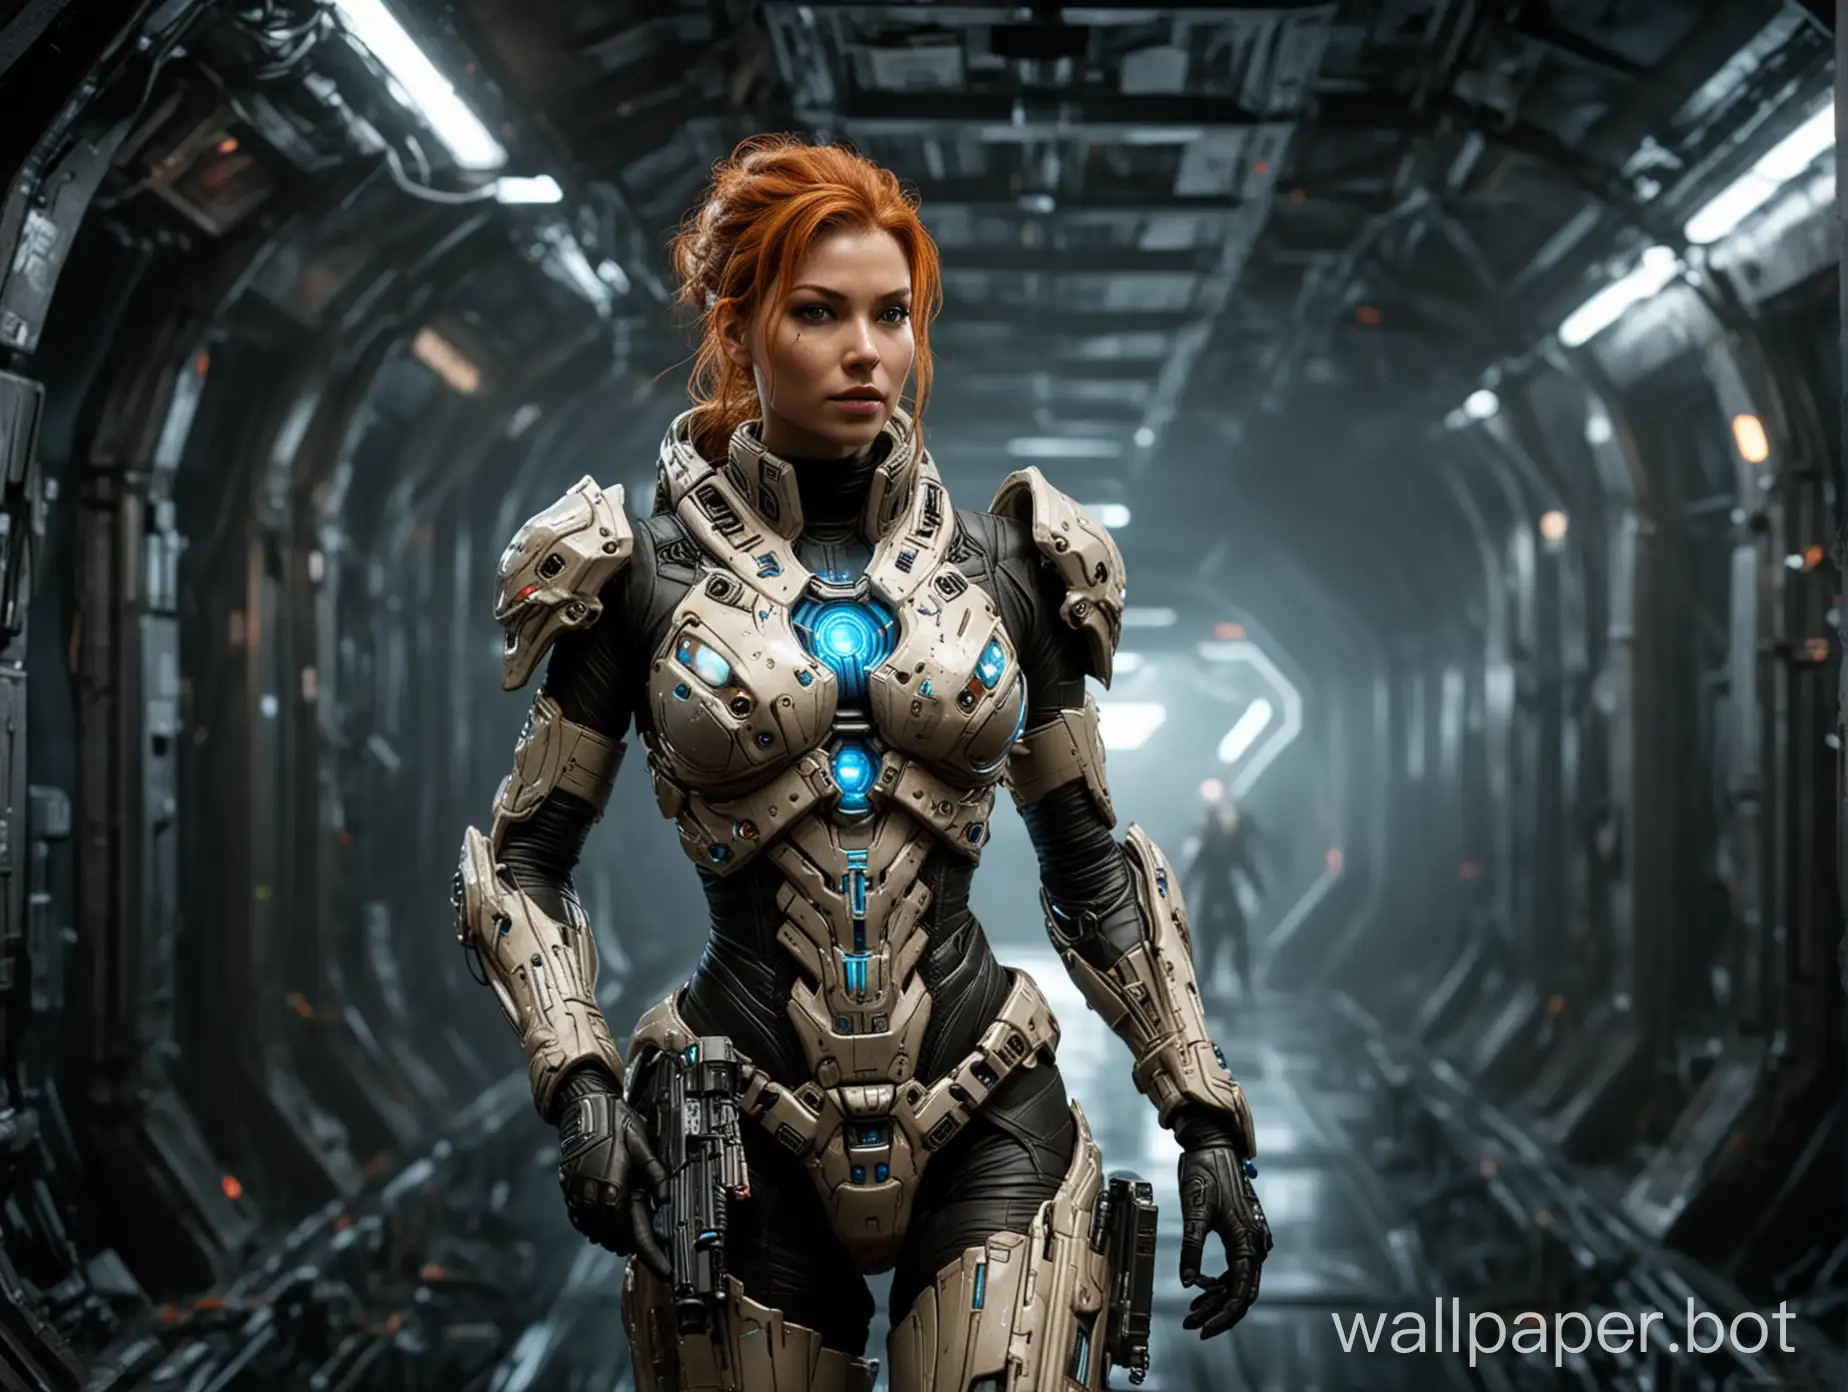 Sarah Kerrigan from the game Starcraft in futuristic armor with a laser gun walks down the corridor of a spaceship, dark background, in the genre of science fiction